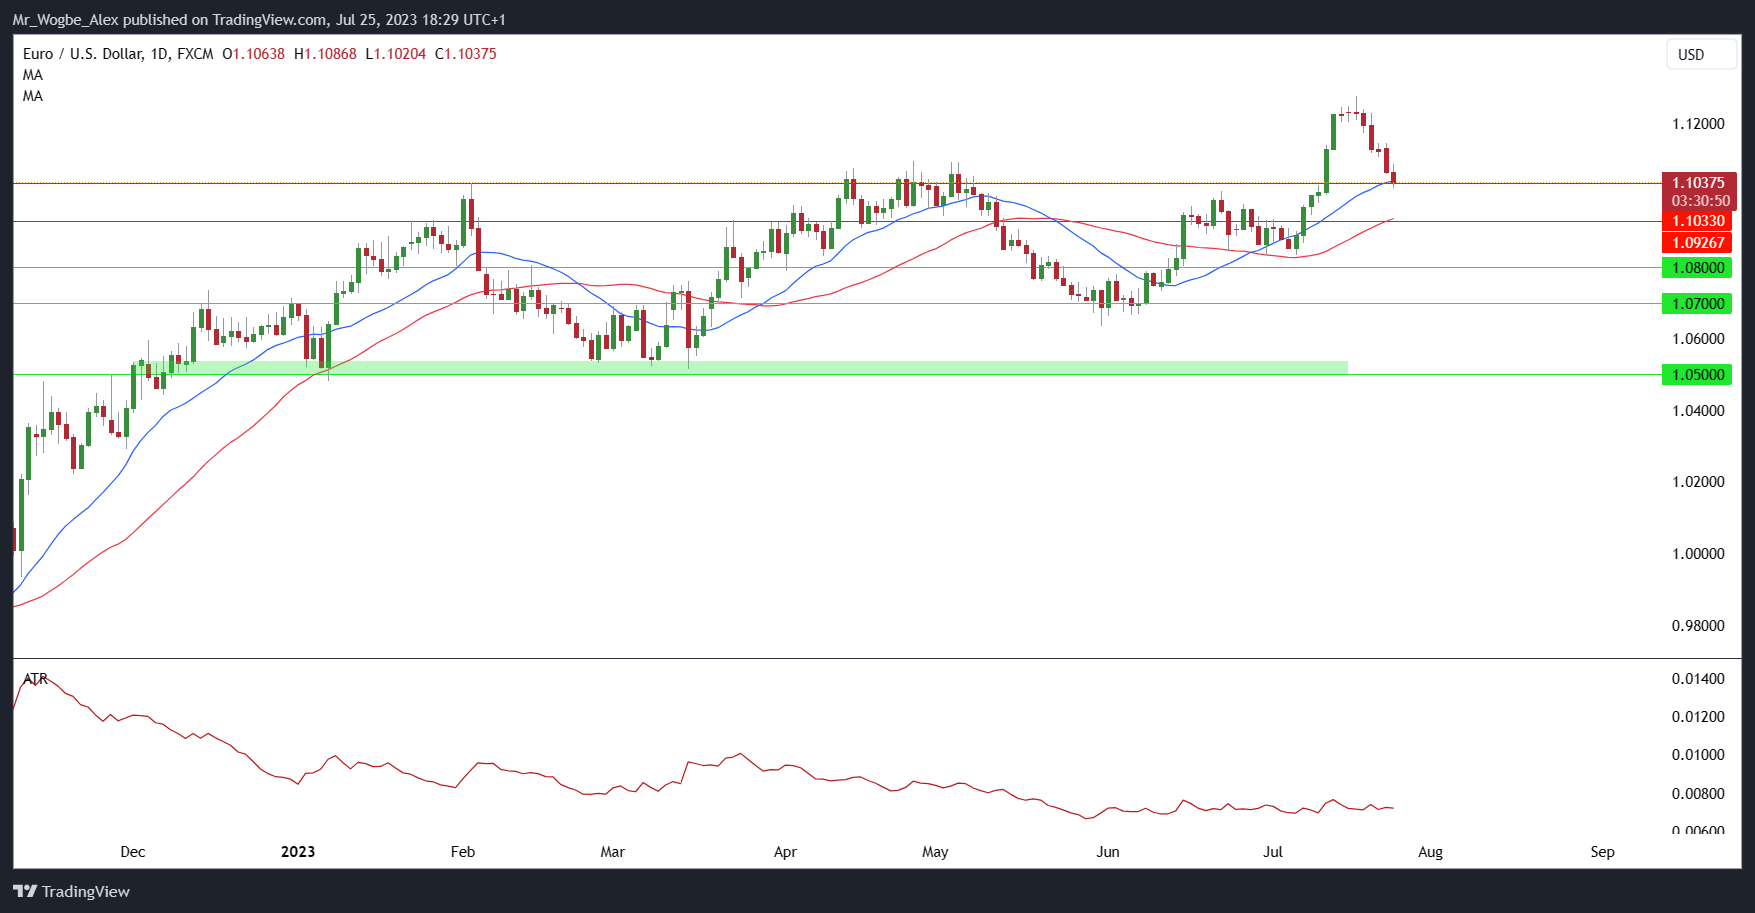 EUR/USD daily chart from TradigView